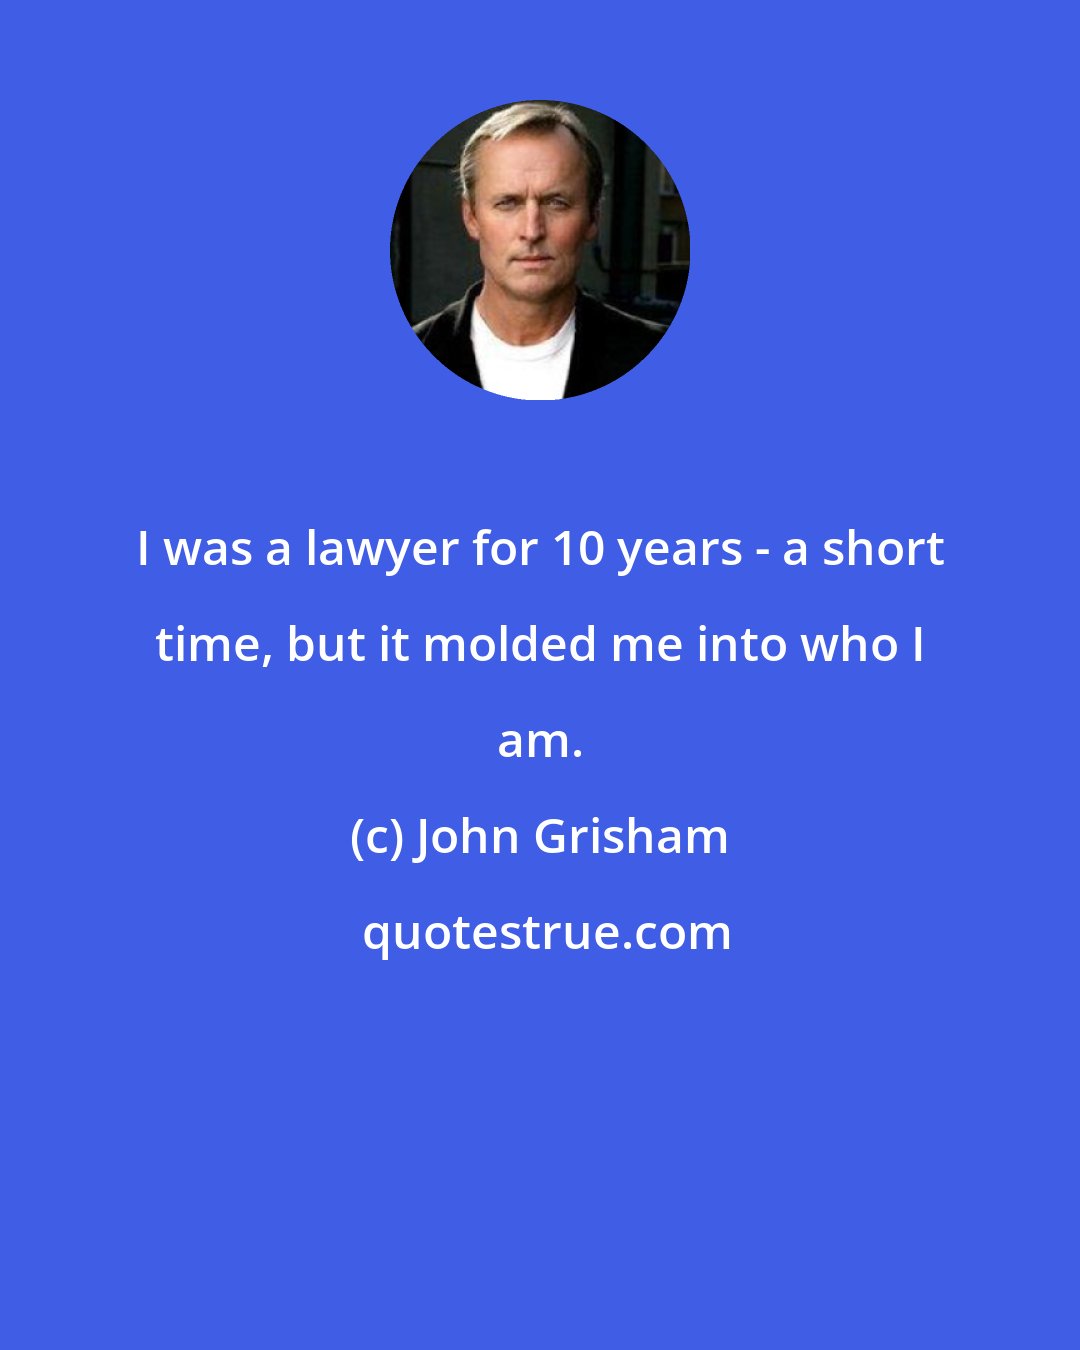 John Grisham: I was a lawyer for 10 years - a short time, but it molded me into who I am.